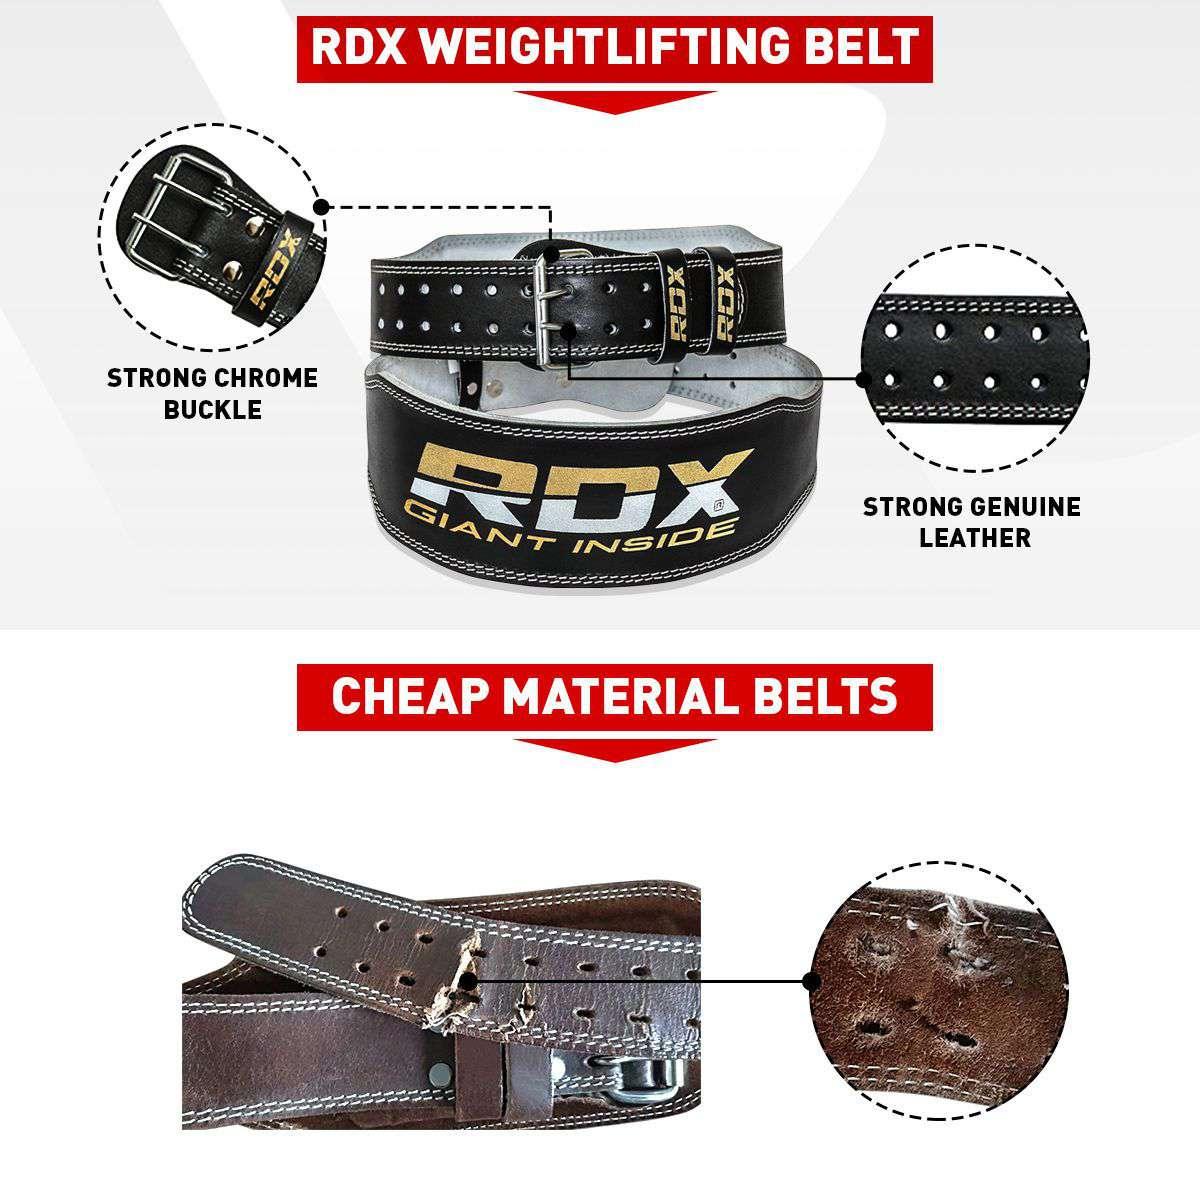 4 INCH LEATHER WEIGHTLIFTING GYM BELT RDX – Fitness Health